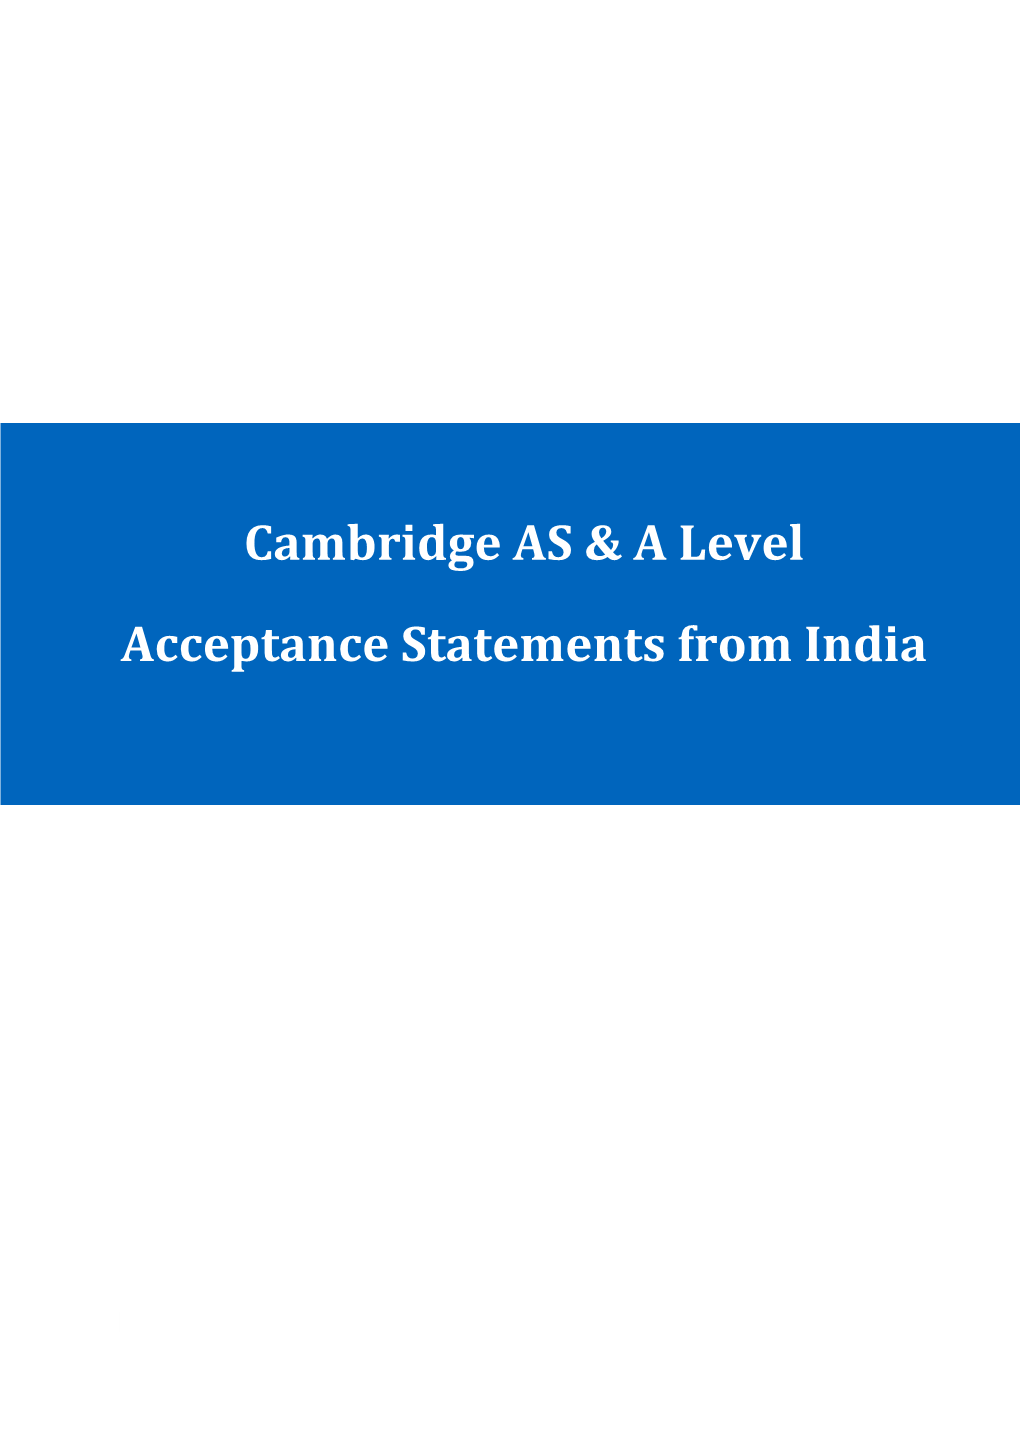 Cambridge AS & a Level Acceptance Statements from India